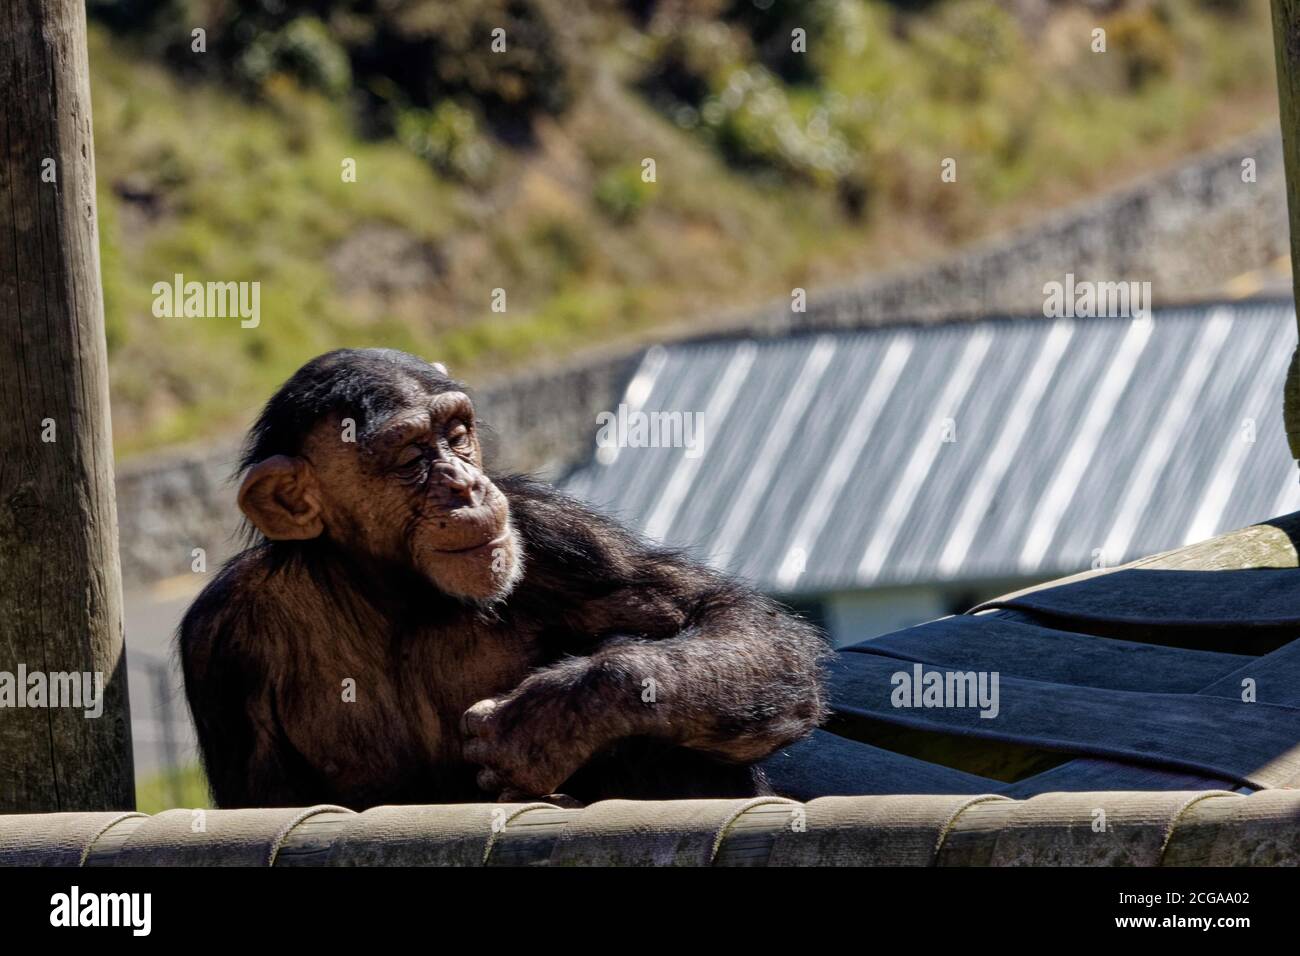 The chimpanzee (Pan troglodytes), also known as the common chimpanzee, robust chimpanzee, or simply chimp, is a species of great ape. Stock Photo